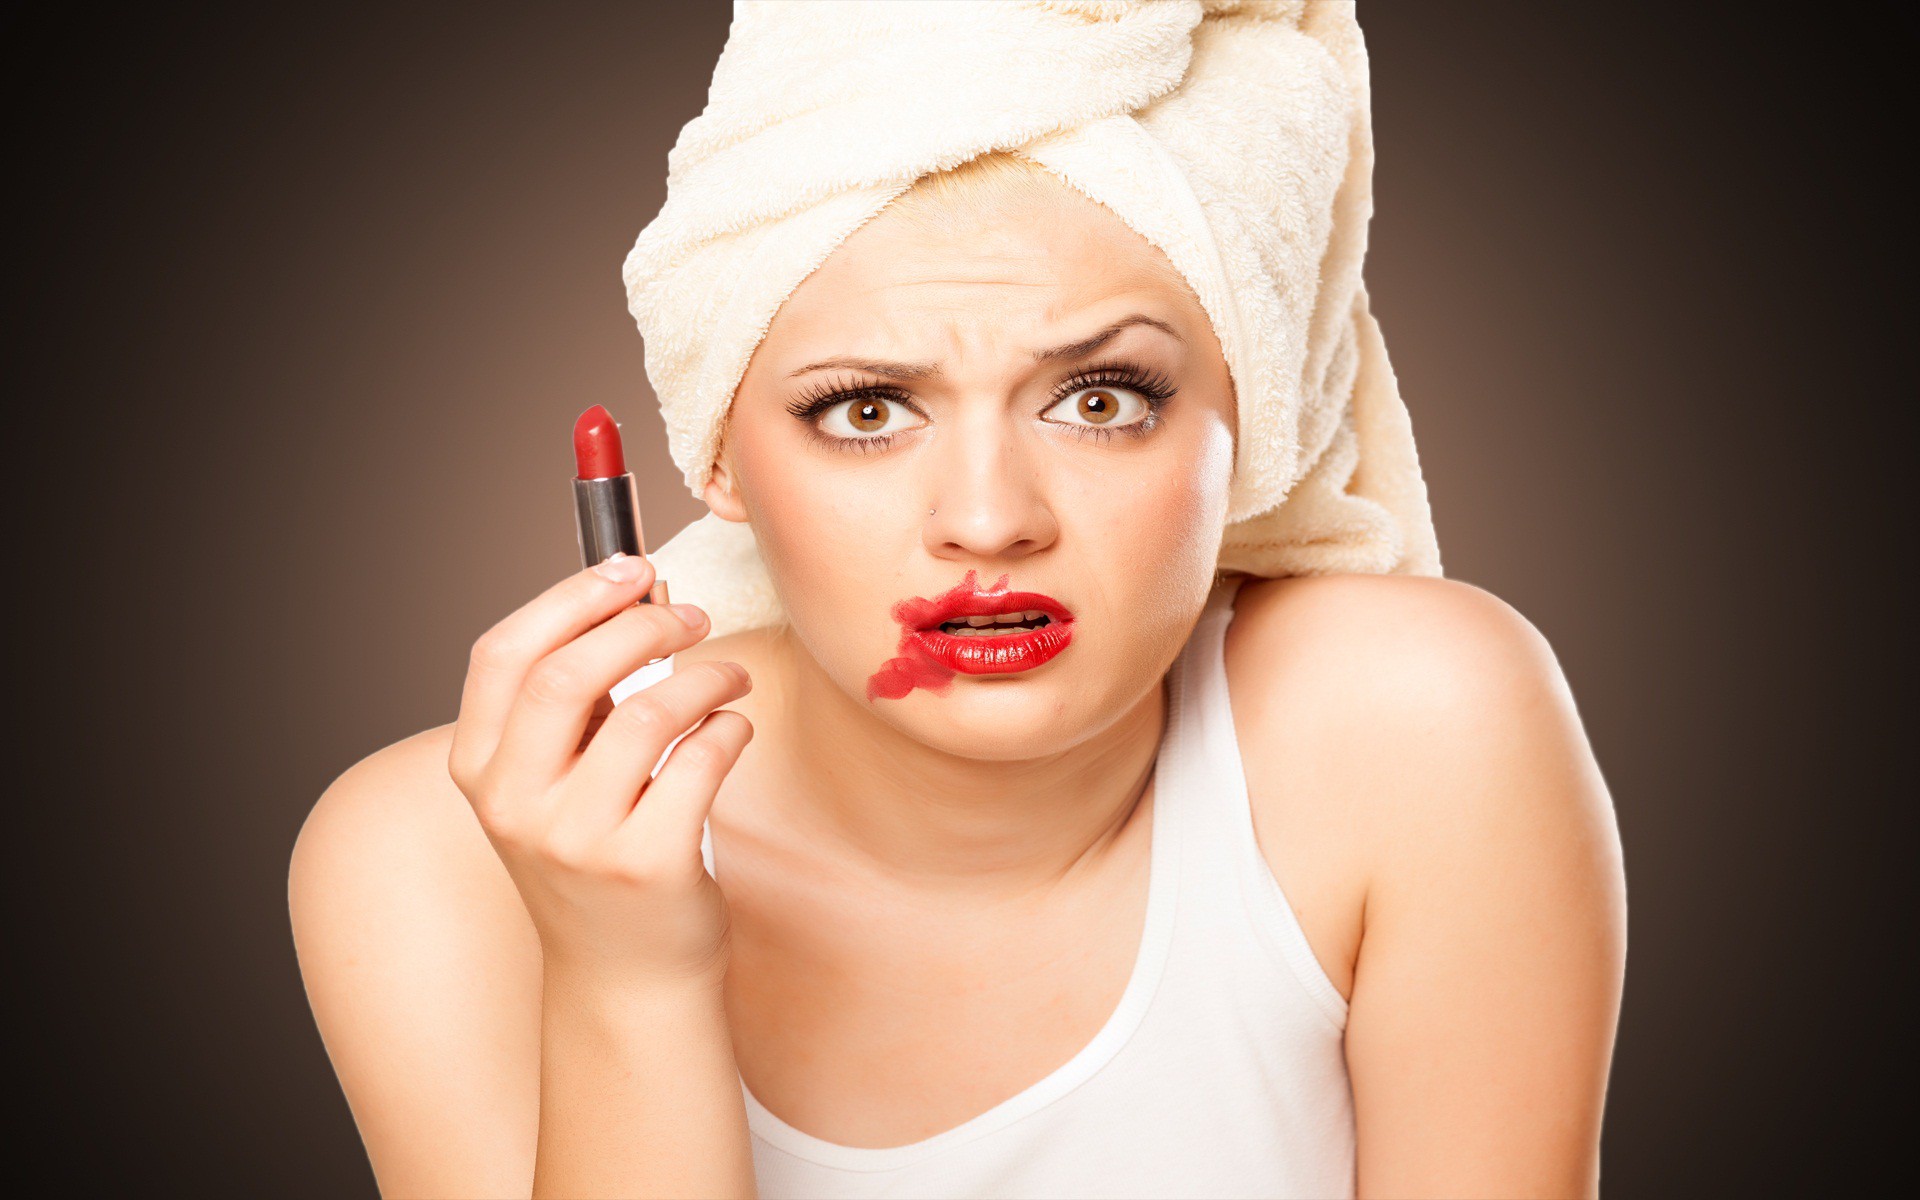 funny girl after lipstick free awesome image for mobile